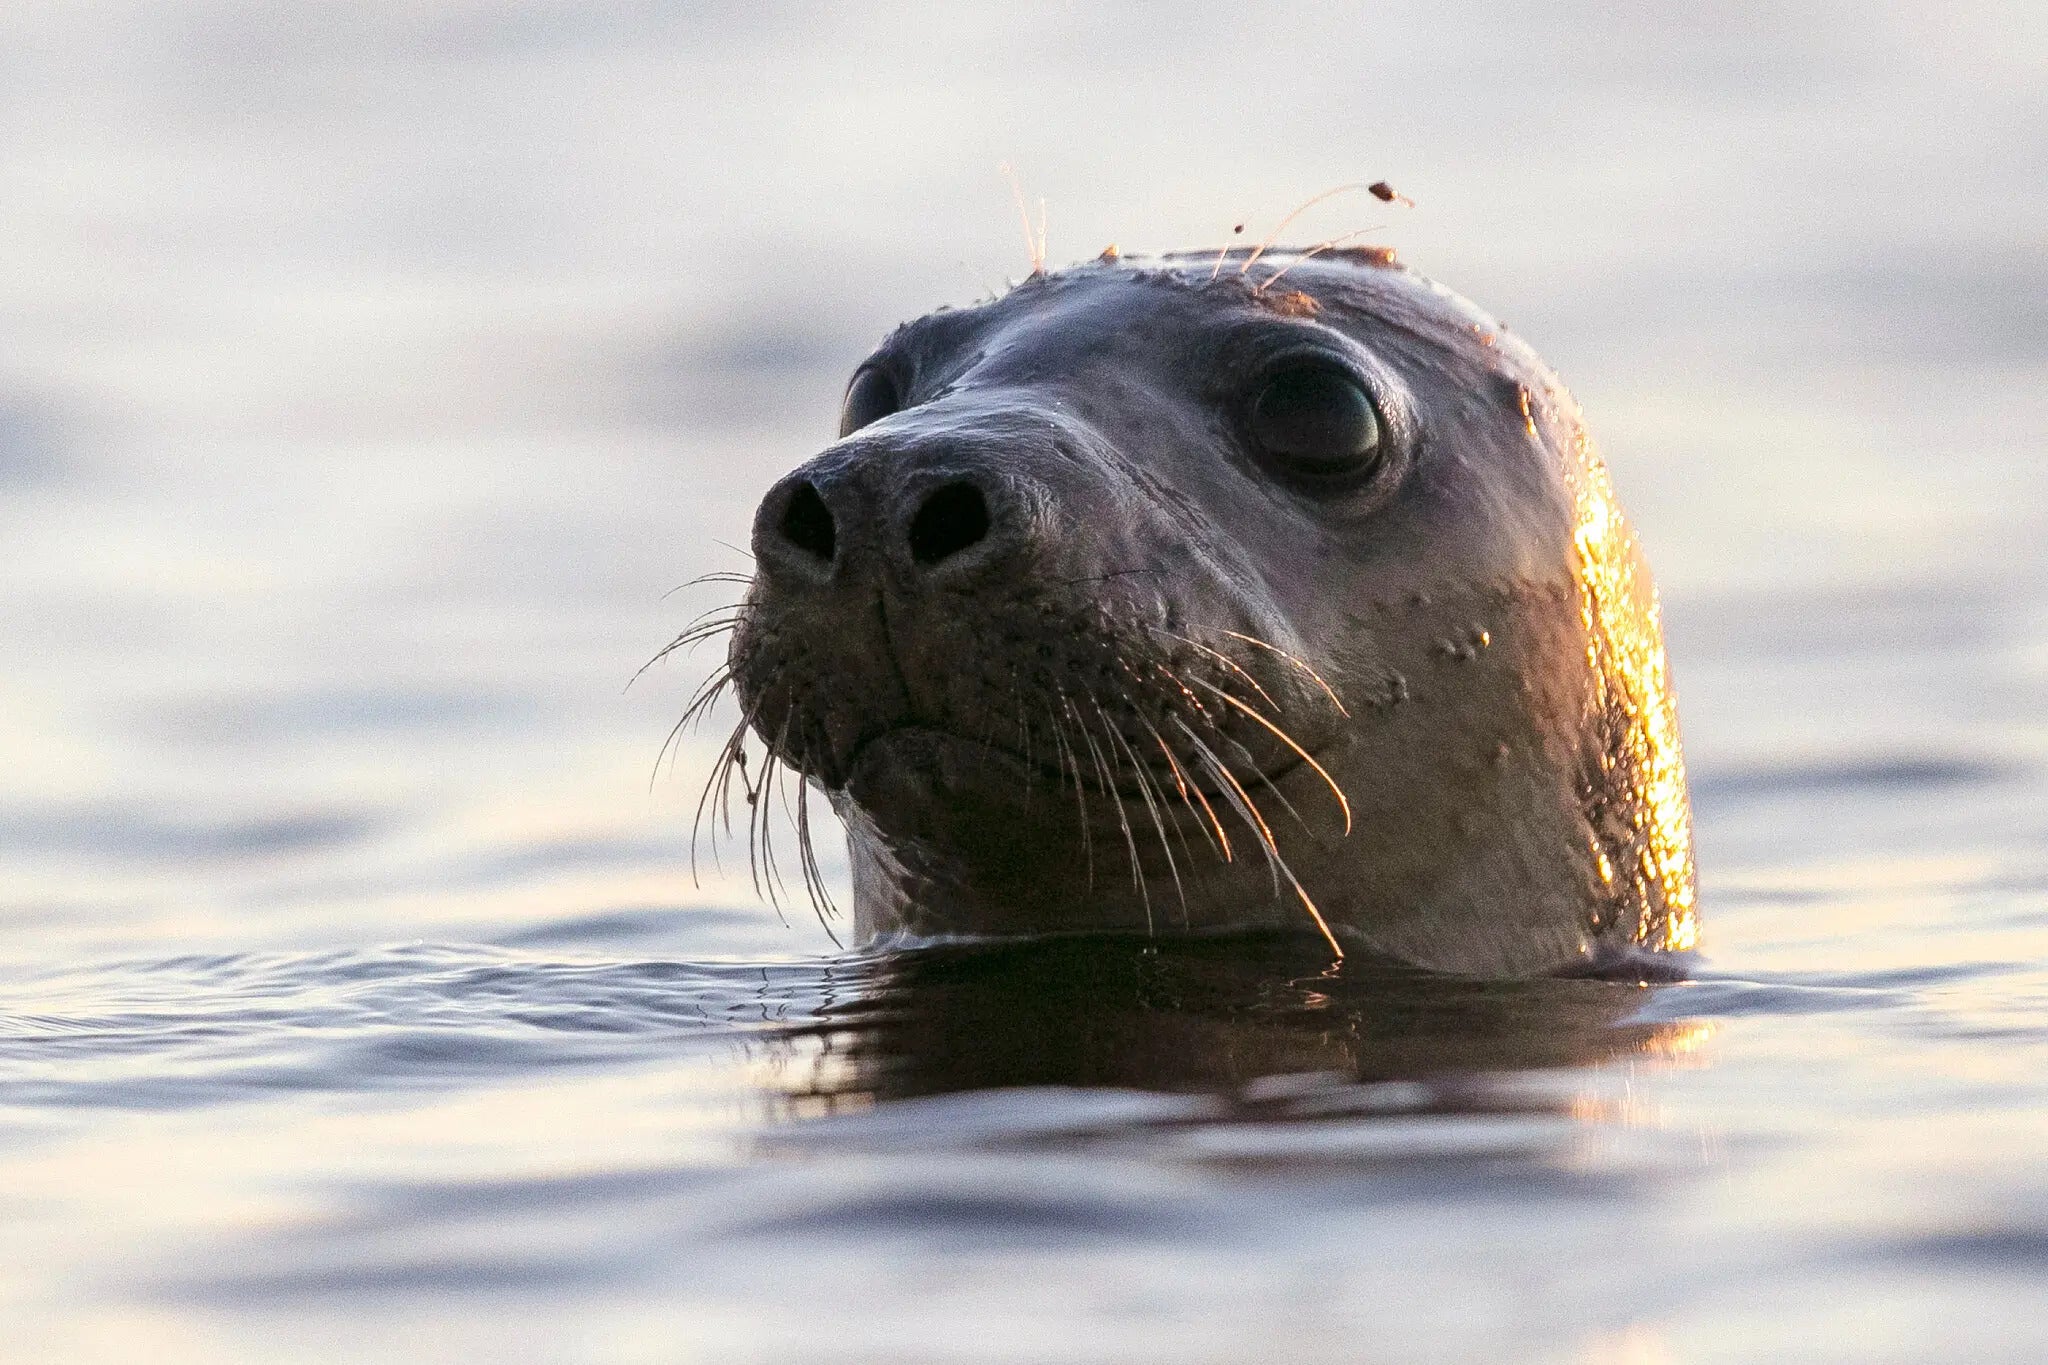 A seal emerges from water.